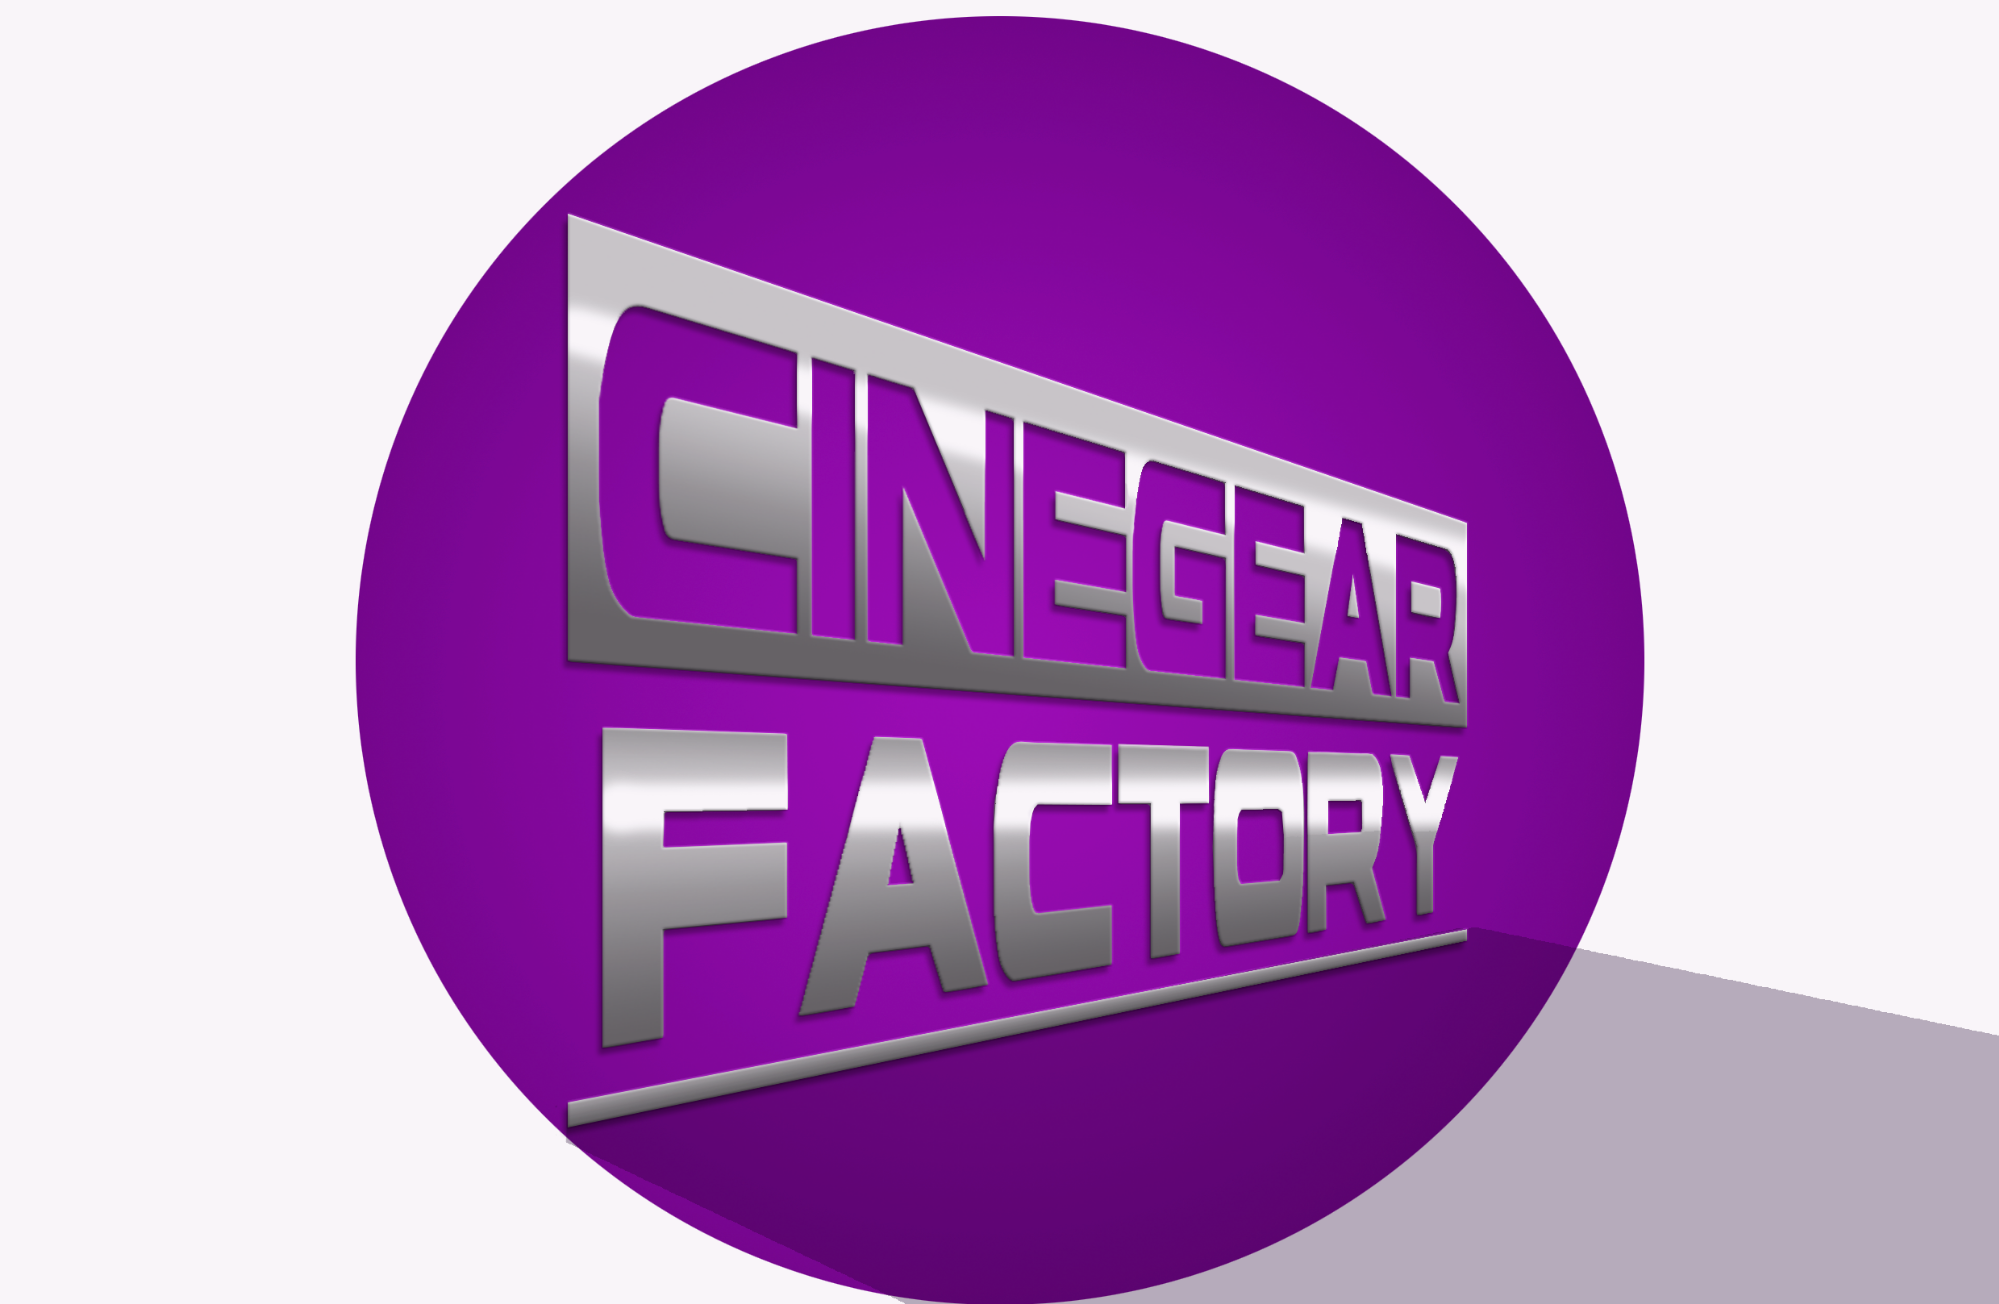 CineGearFactory-One Stop Purchase for All Your Film/Video/Broadcast/Studio equipment